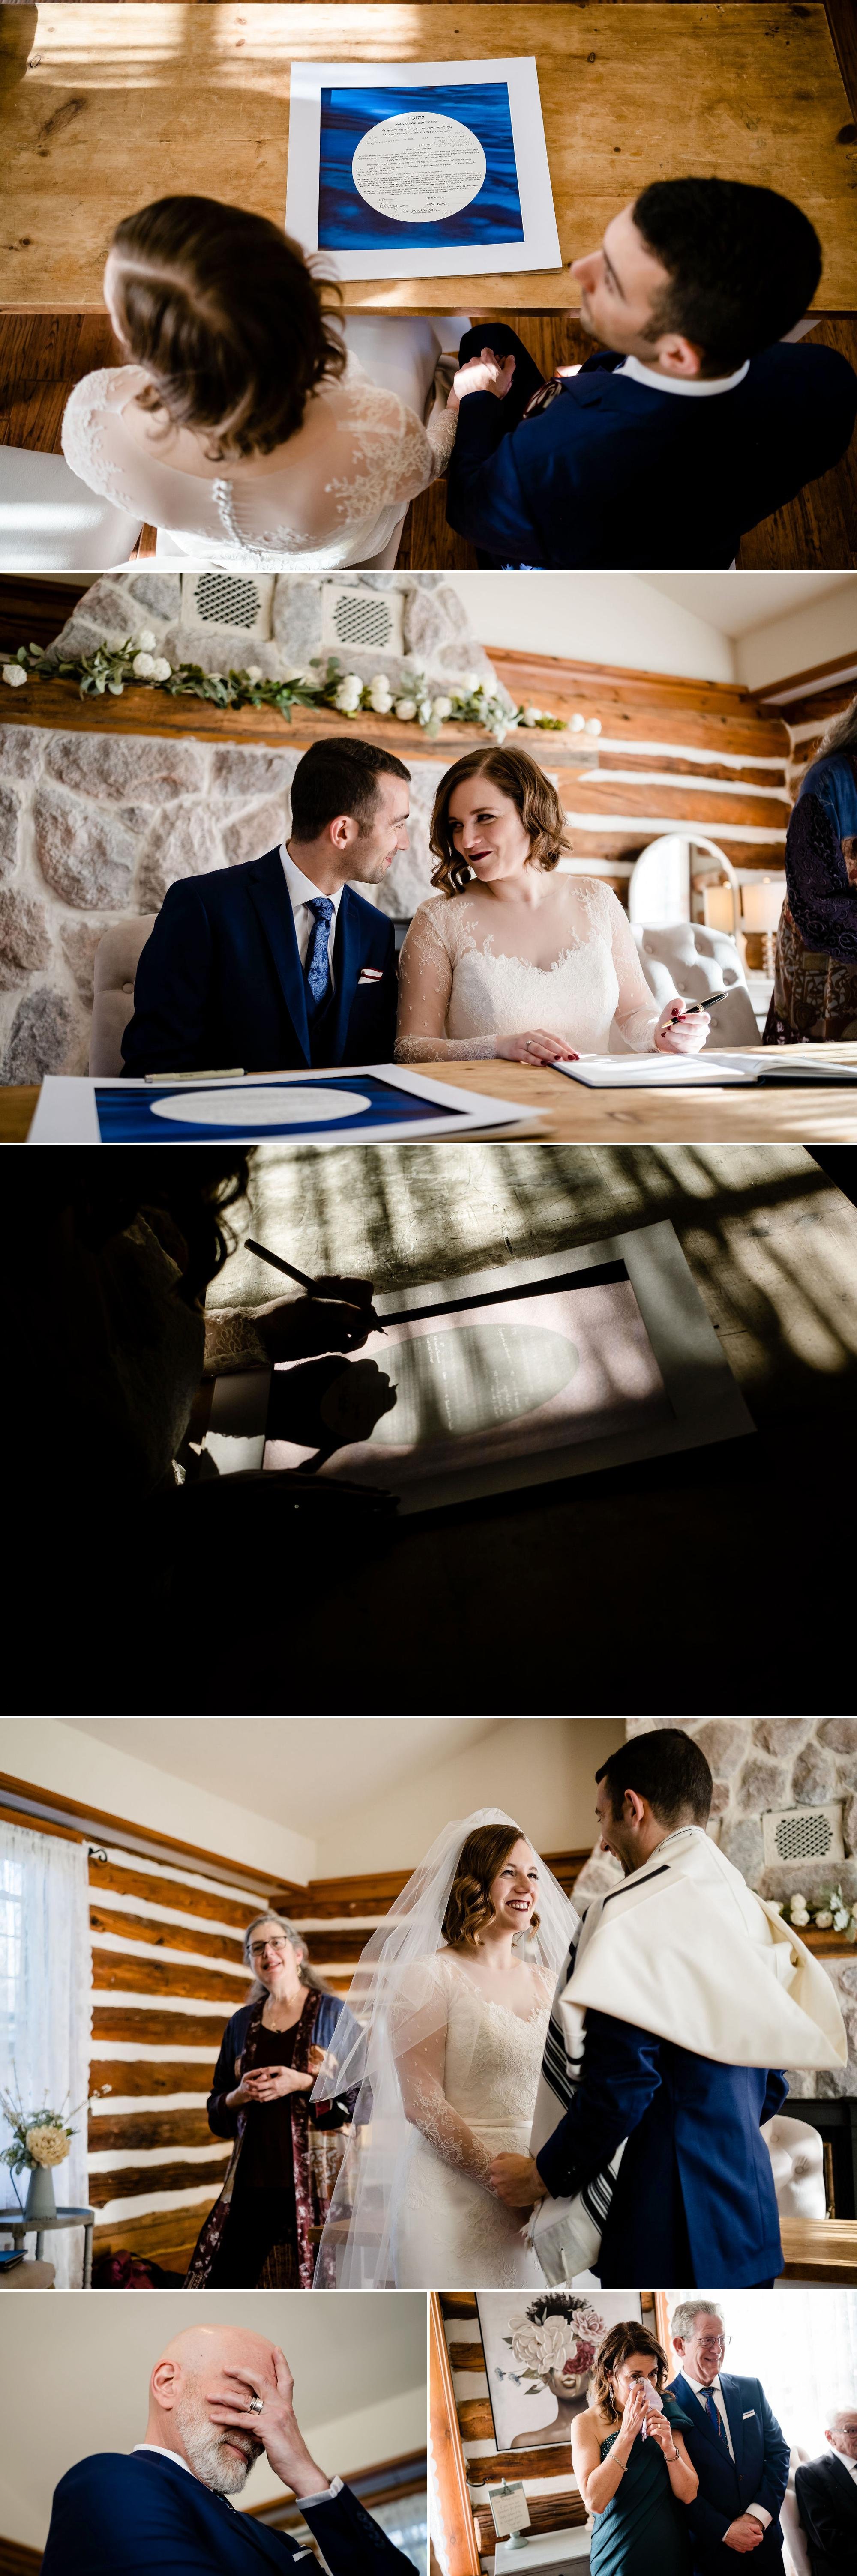 photos of a ketubah signing at stonefields estate